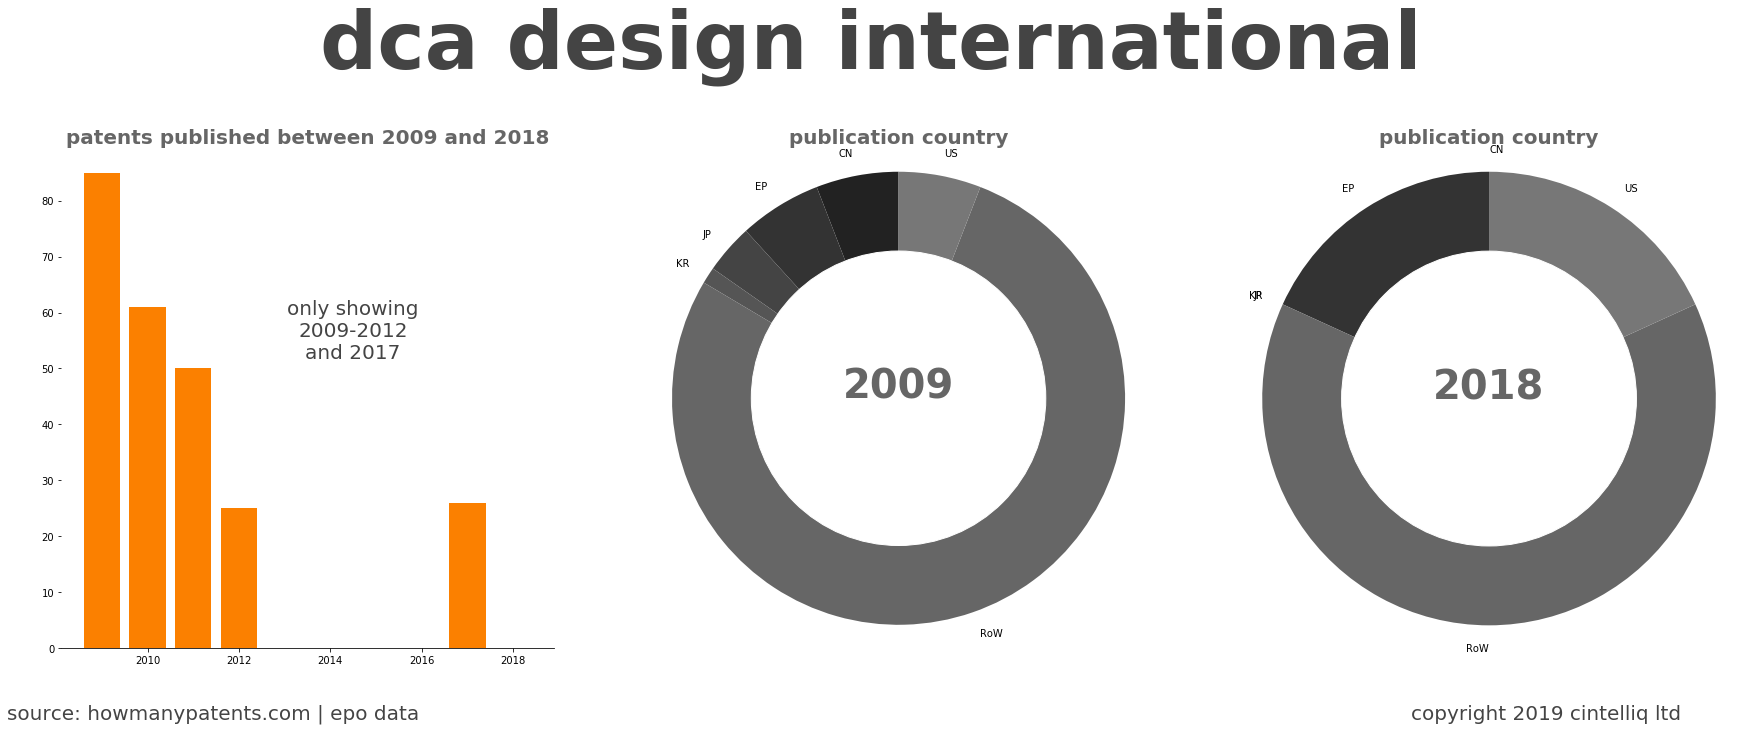 summary of patents for Dca Design International